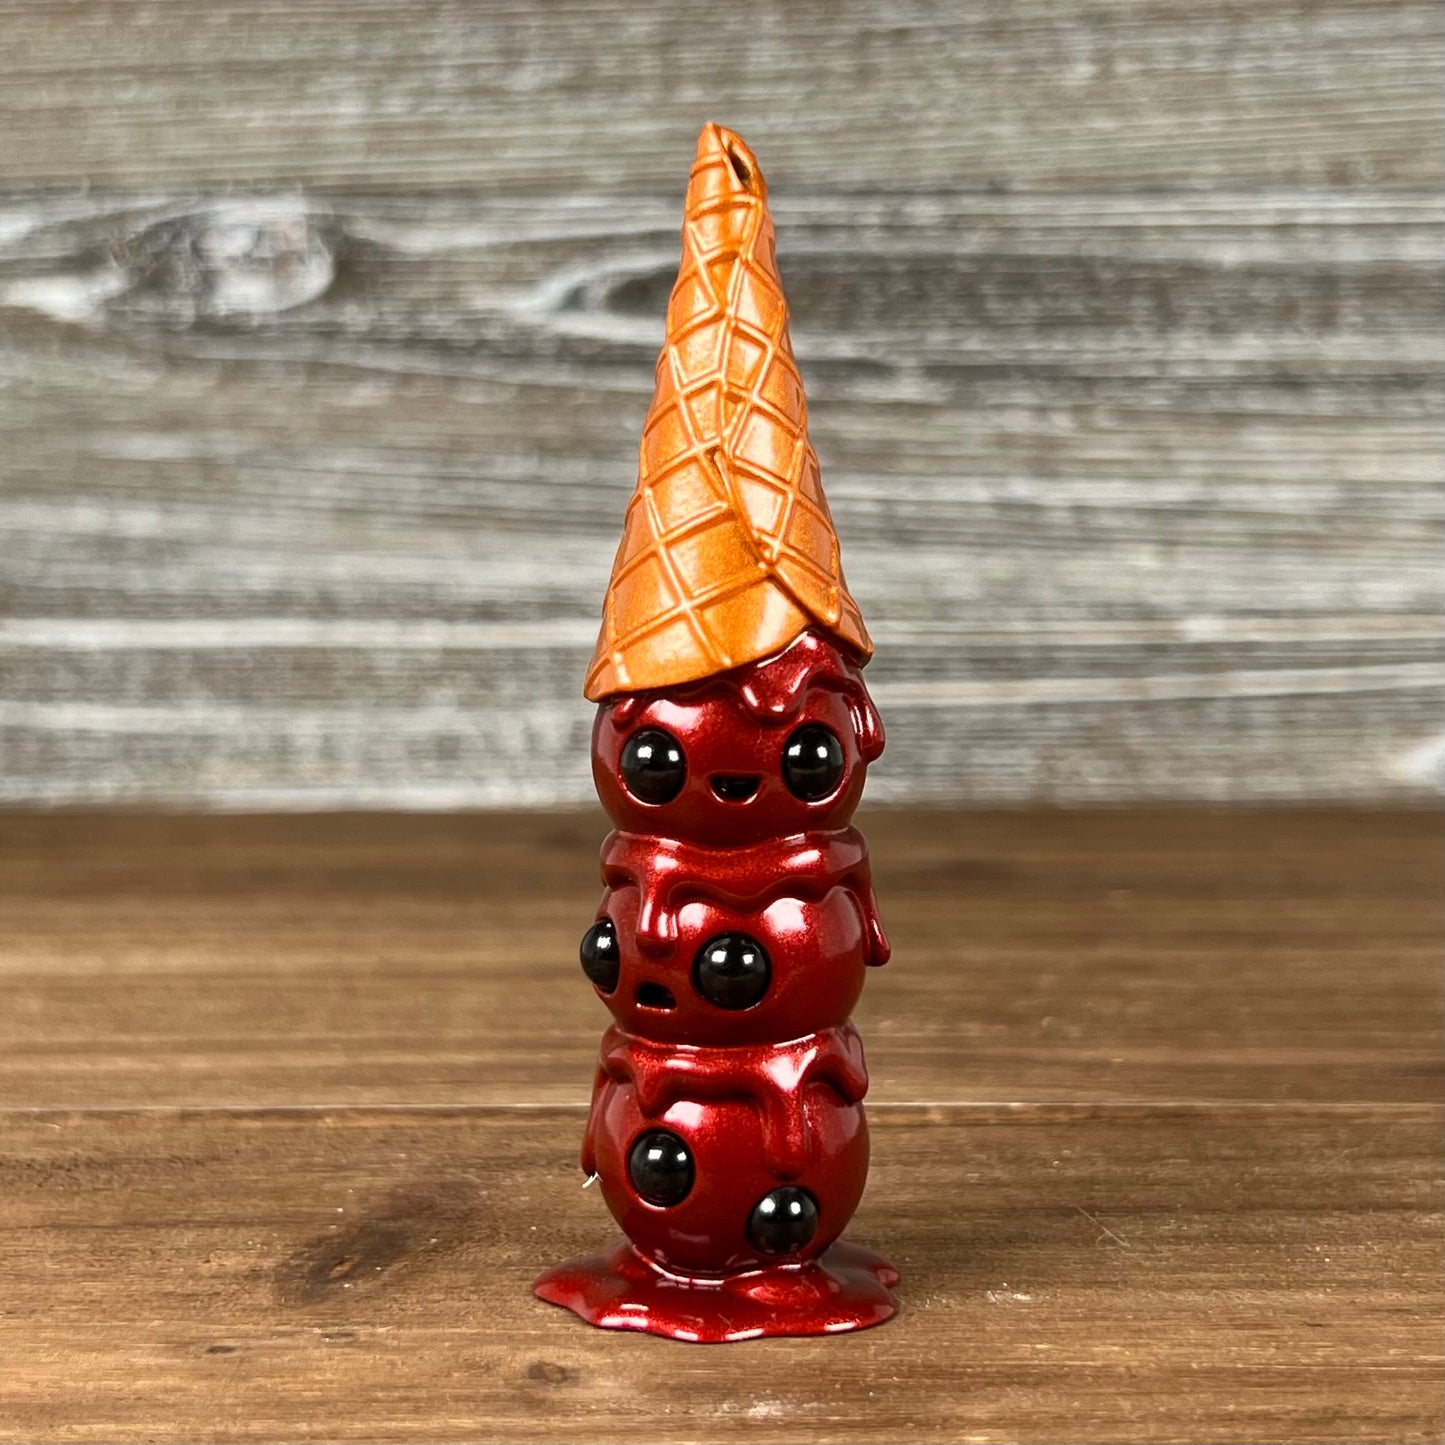 Candied Cherry - This is Wafull 3.75" Resin Figure